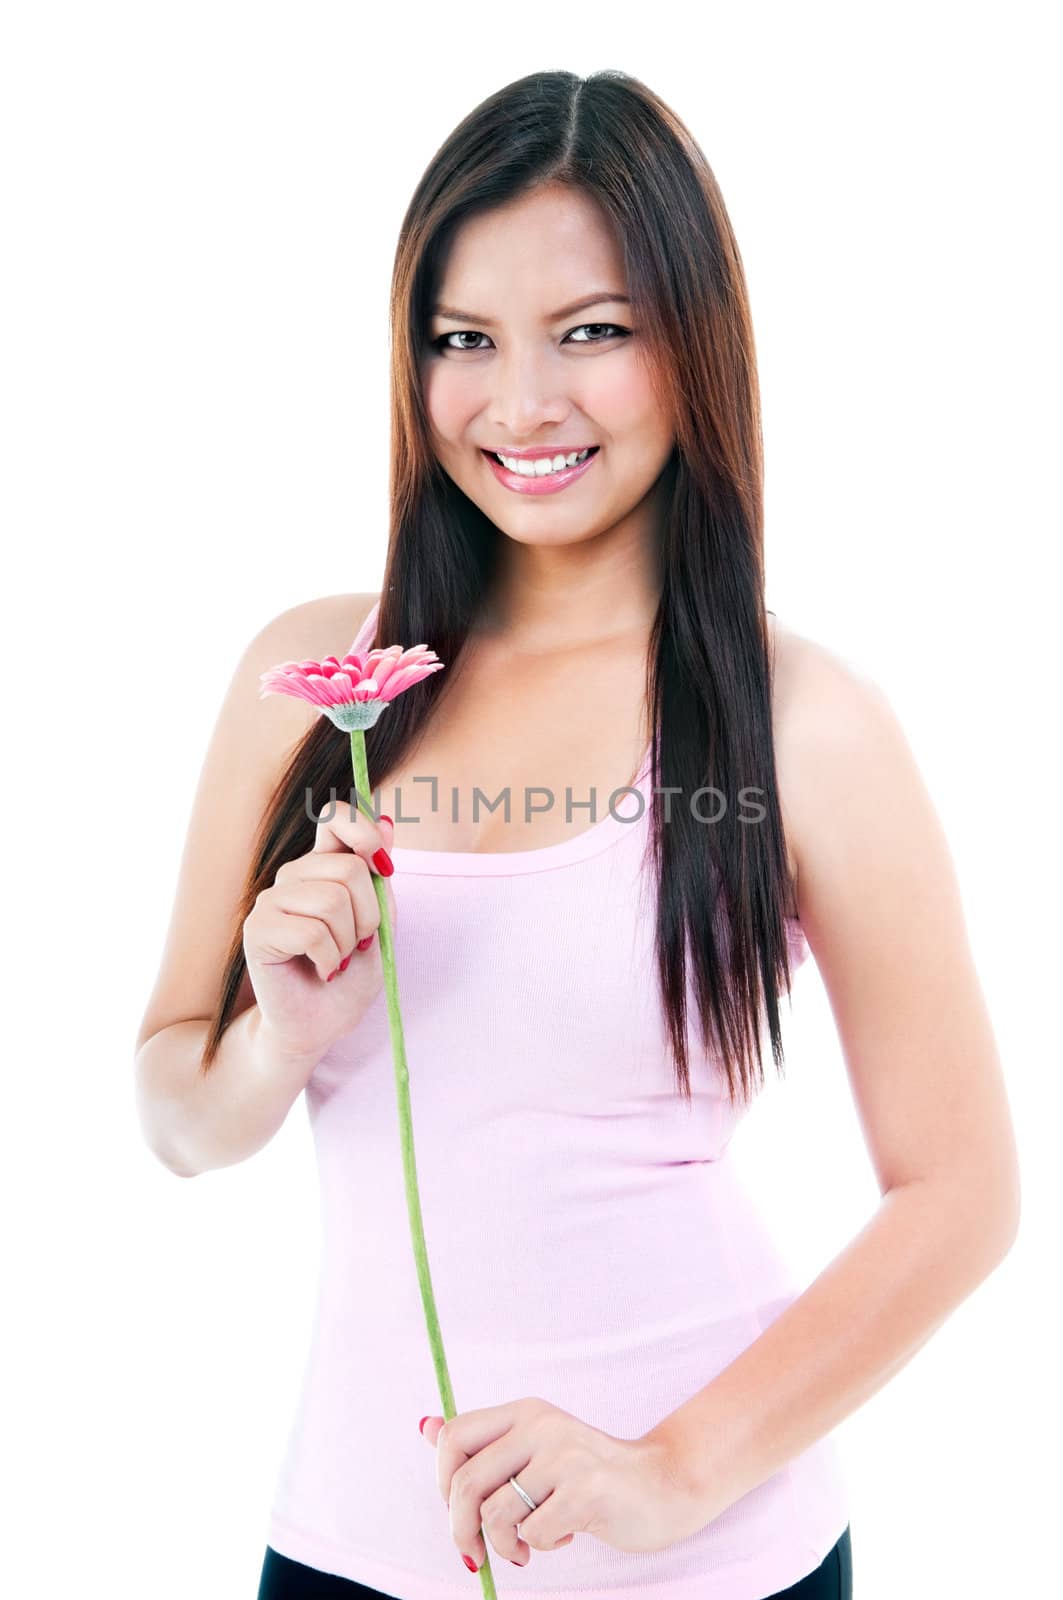 Pretty woman holding pink daisy over white background.